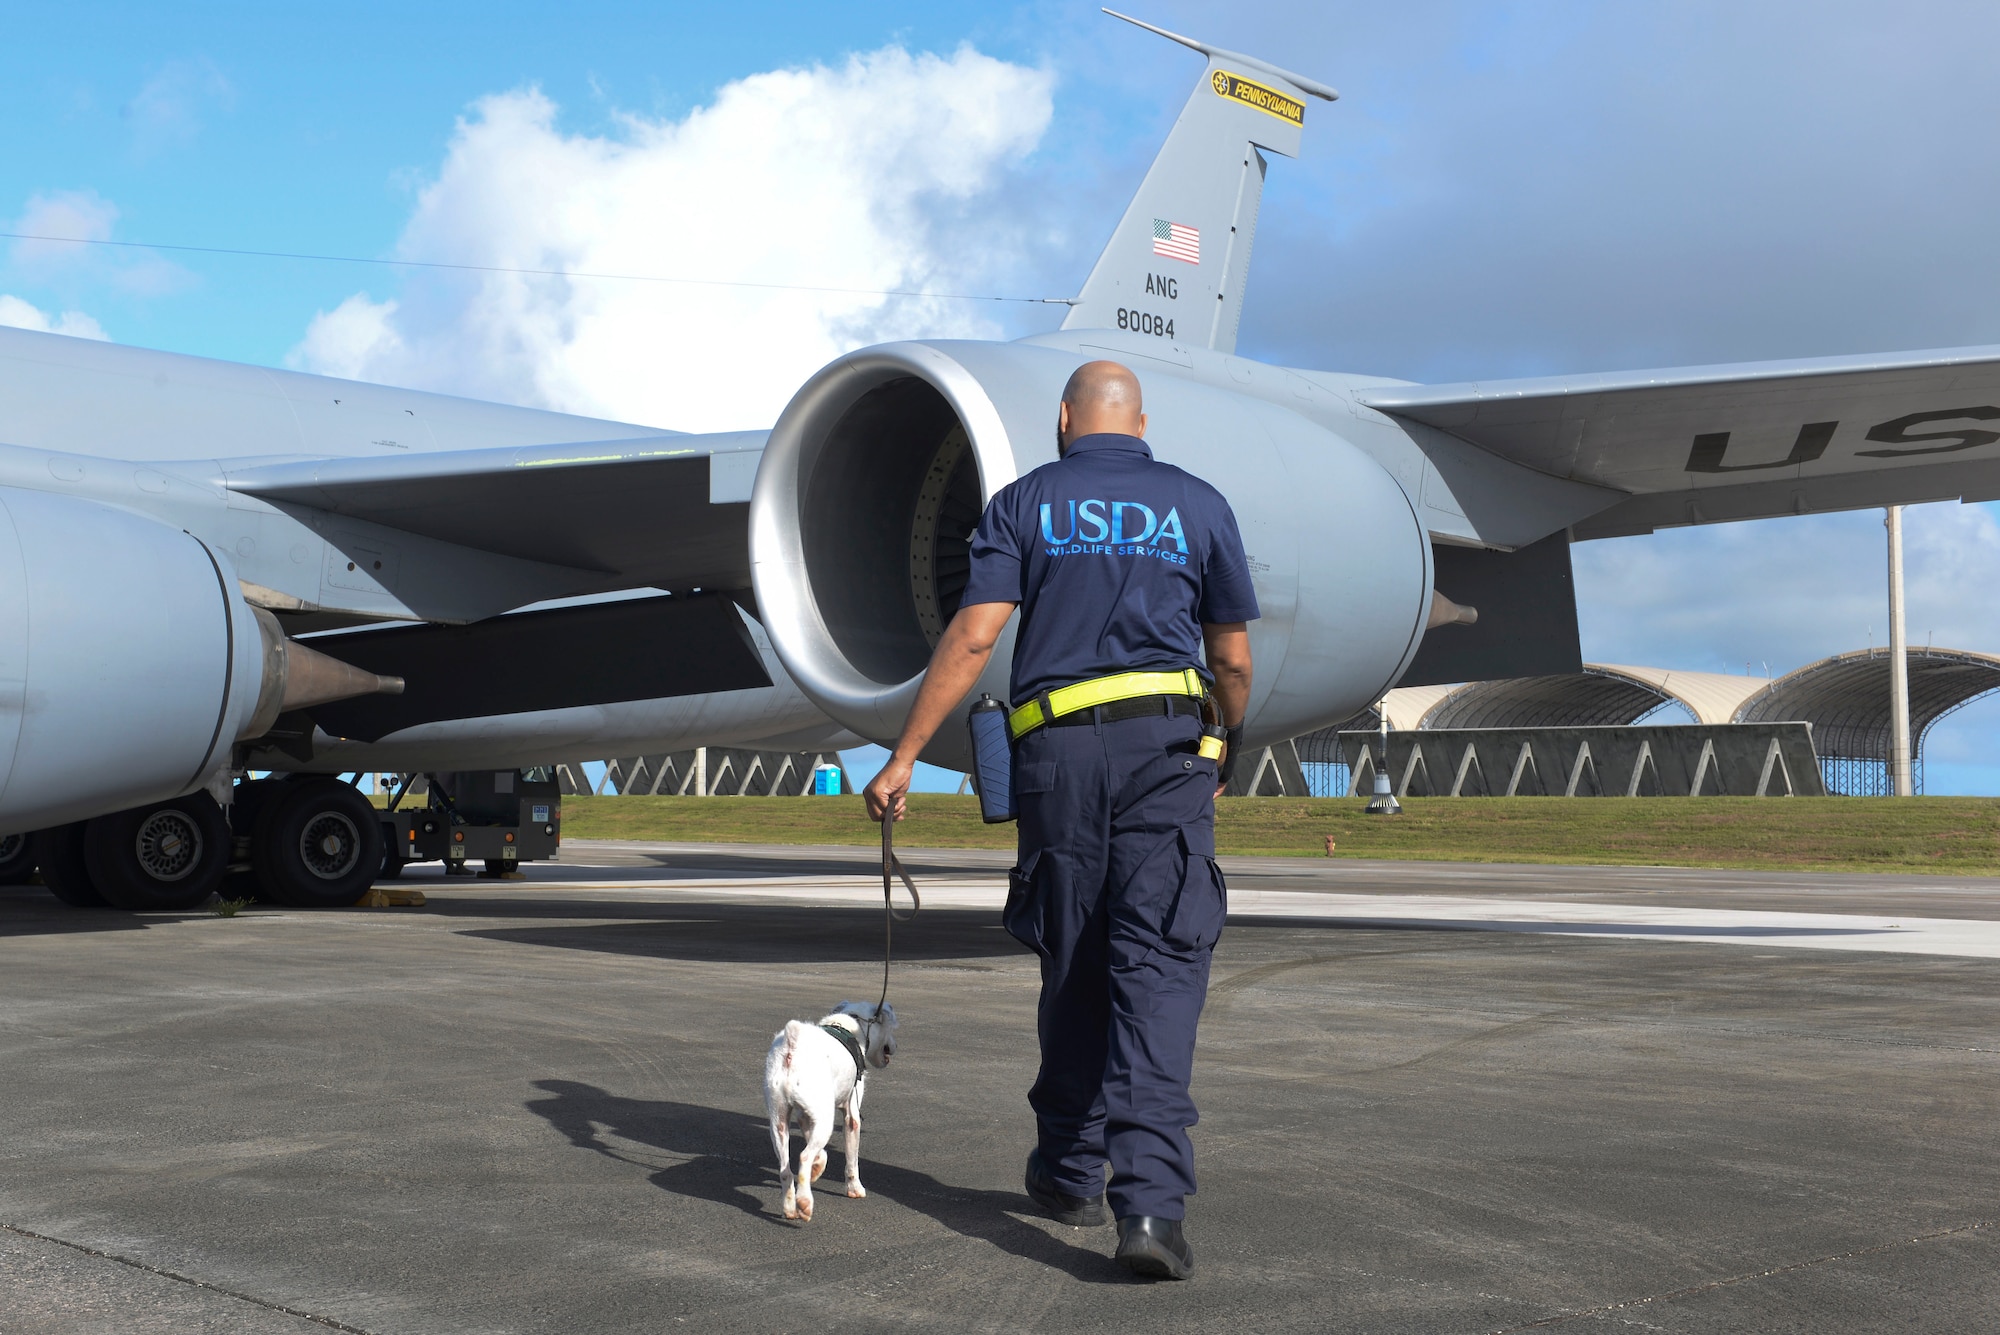 Tony Thompson, a U.S. Department of Agriculture brown tree snake detector dog handler, and Striker, a USDA brown tree snake detector dog, inspect an aircraft prior to departure April 30, 2015, at Andersen Air Force Base, Guam. With the utilization of the 17 active detector dog teams and 4,000 traps, the USDA has helped significantly prevent the spread of the brown tree snakes. (U.S. Air Force photo/Senior Airman Katrina M. Brisbin)